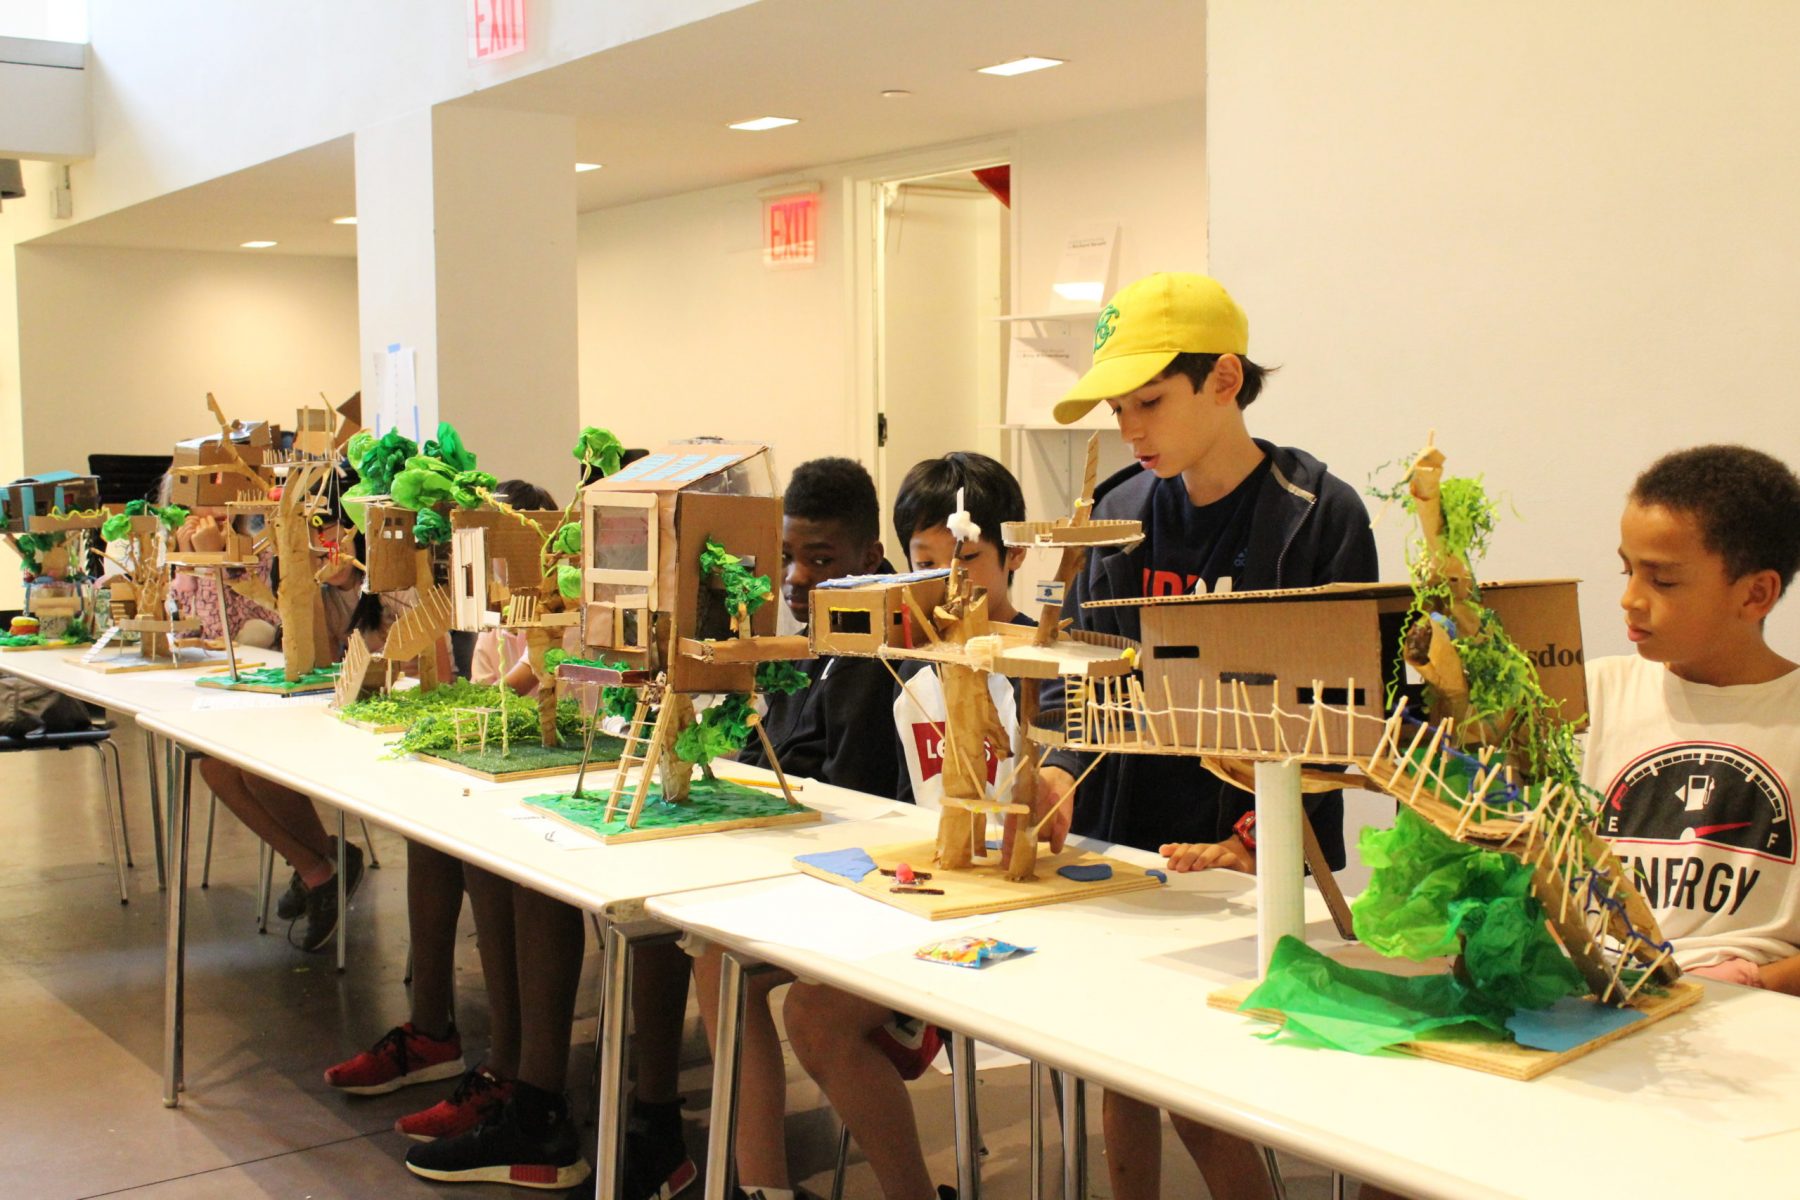 Center for Architecture Summer Programs